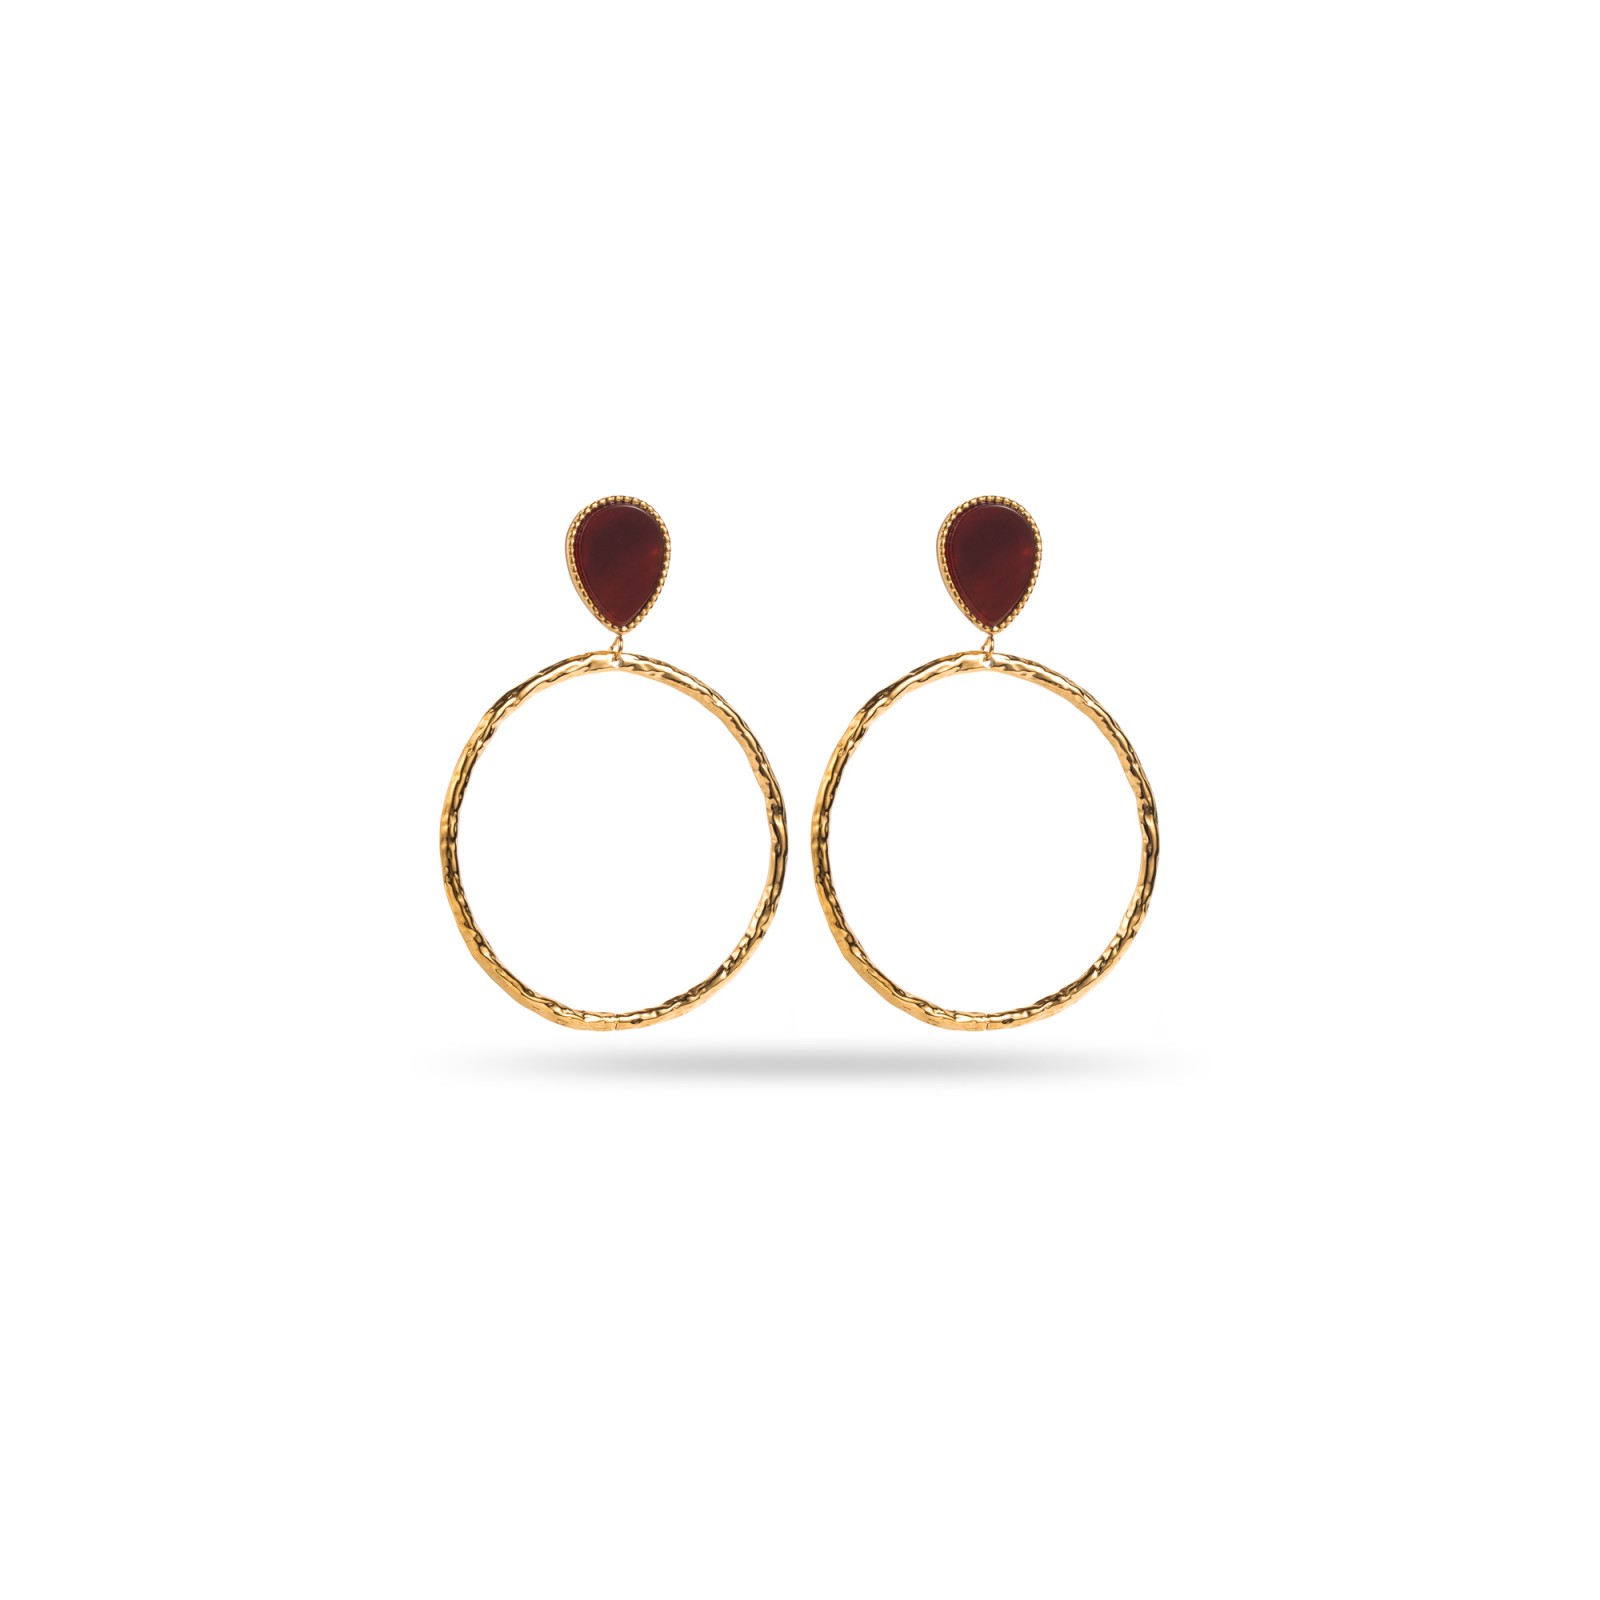 Hammered Hoops with Oval Stone Earrings Stone:Carnelian